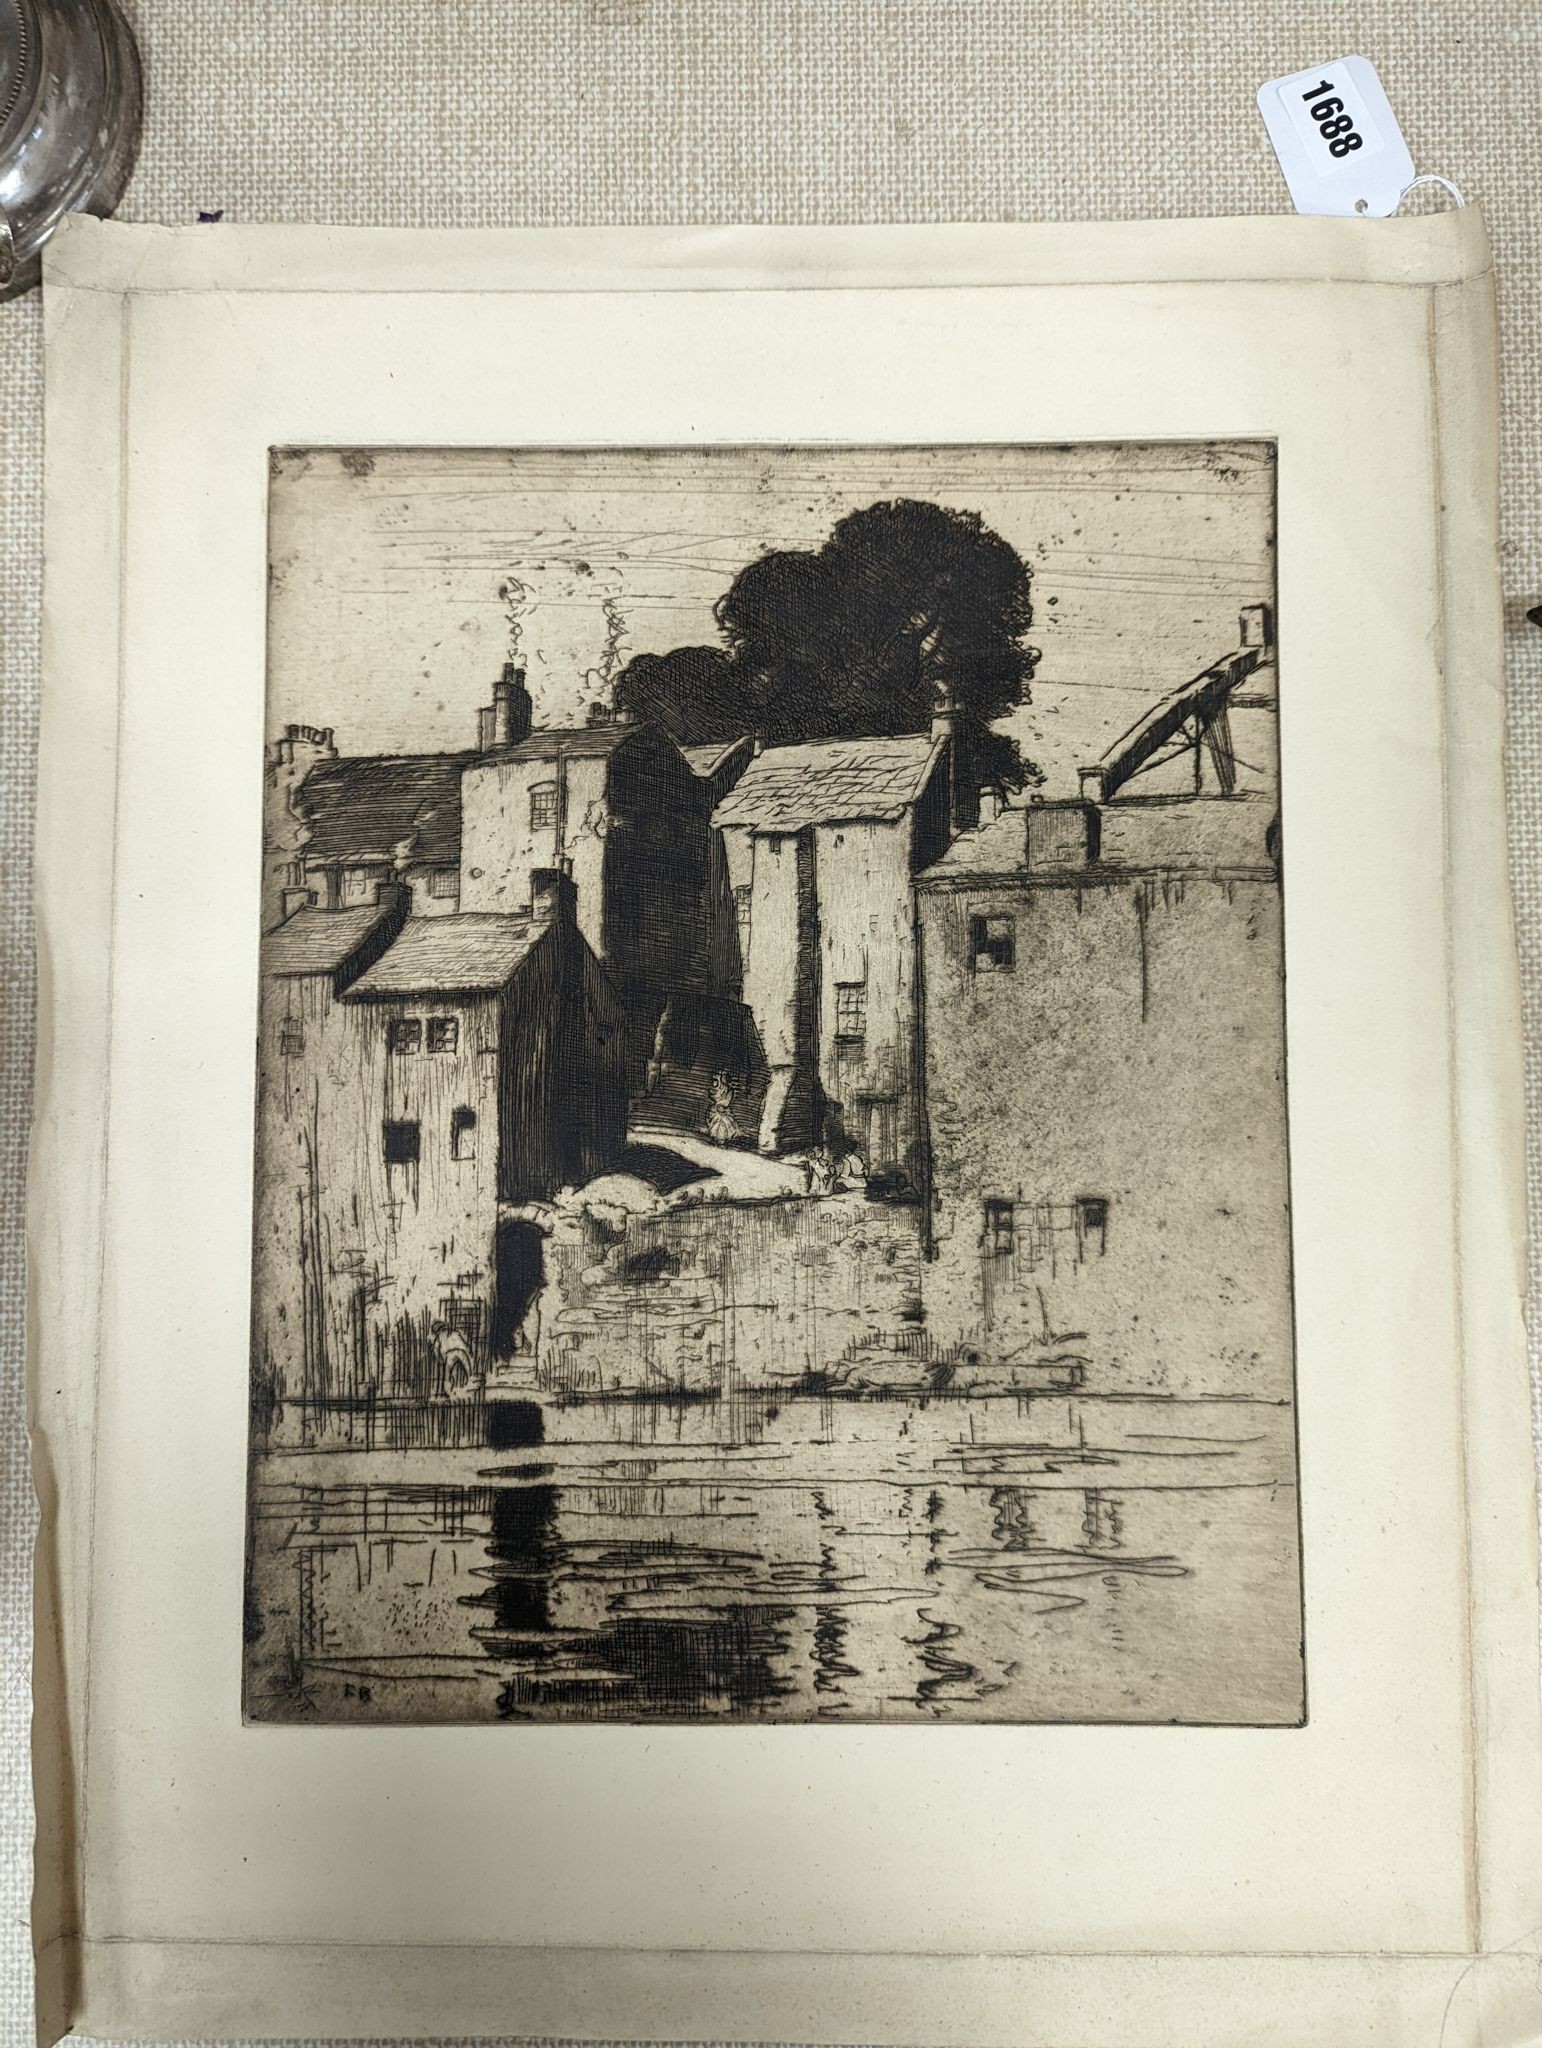 Frank Brangwyn, etching, Barnard Castle from the river Tees, initialled in the plate, 37.5 x 30cm, unframed